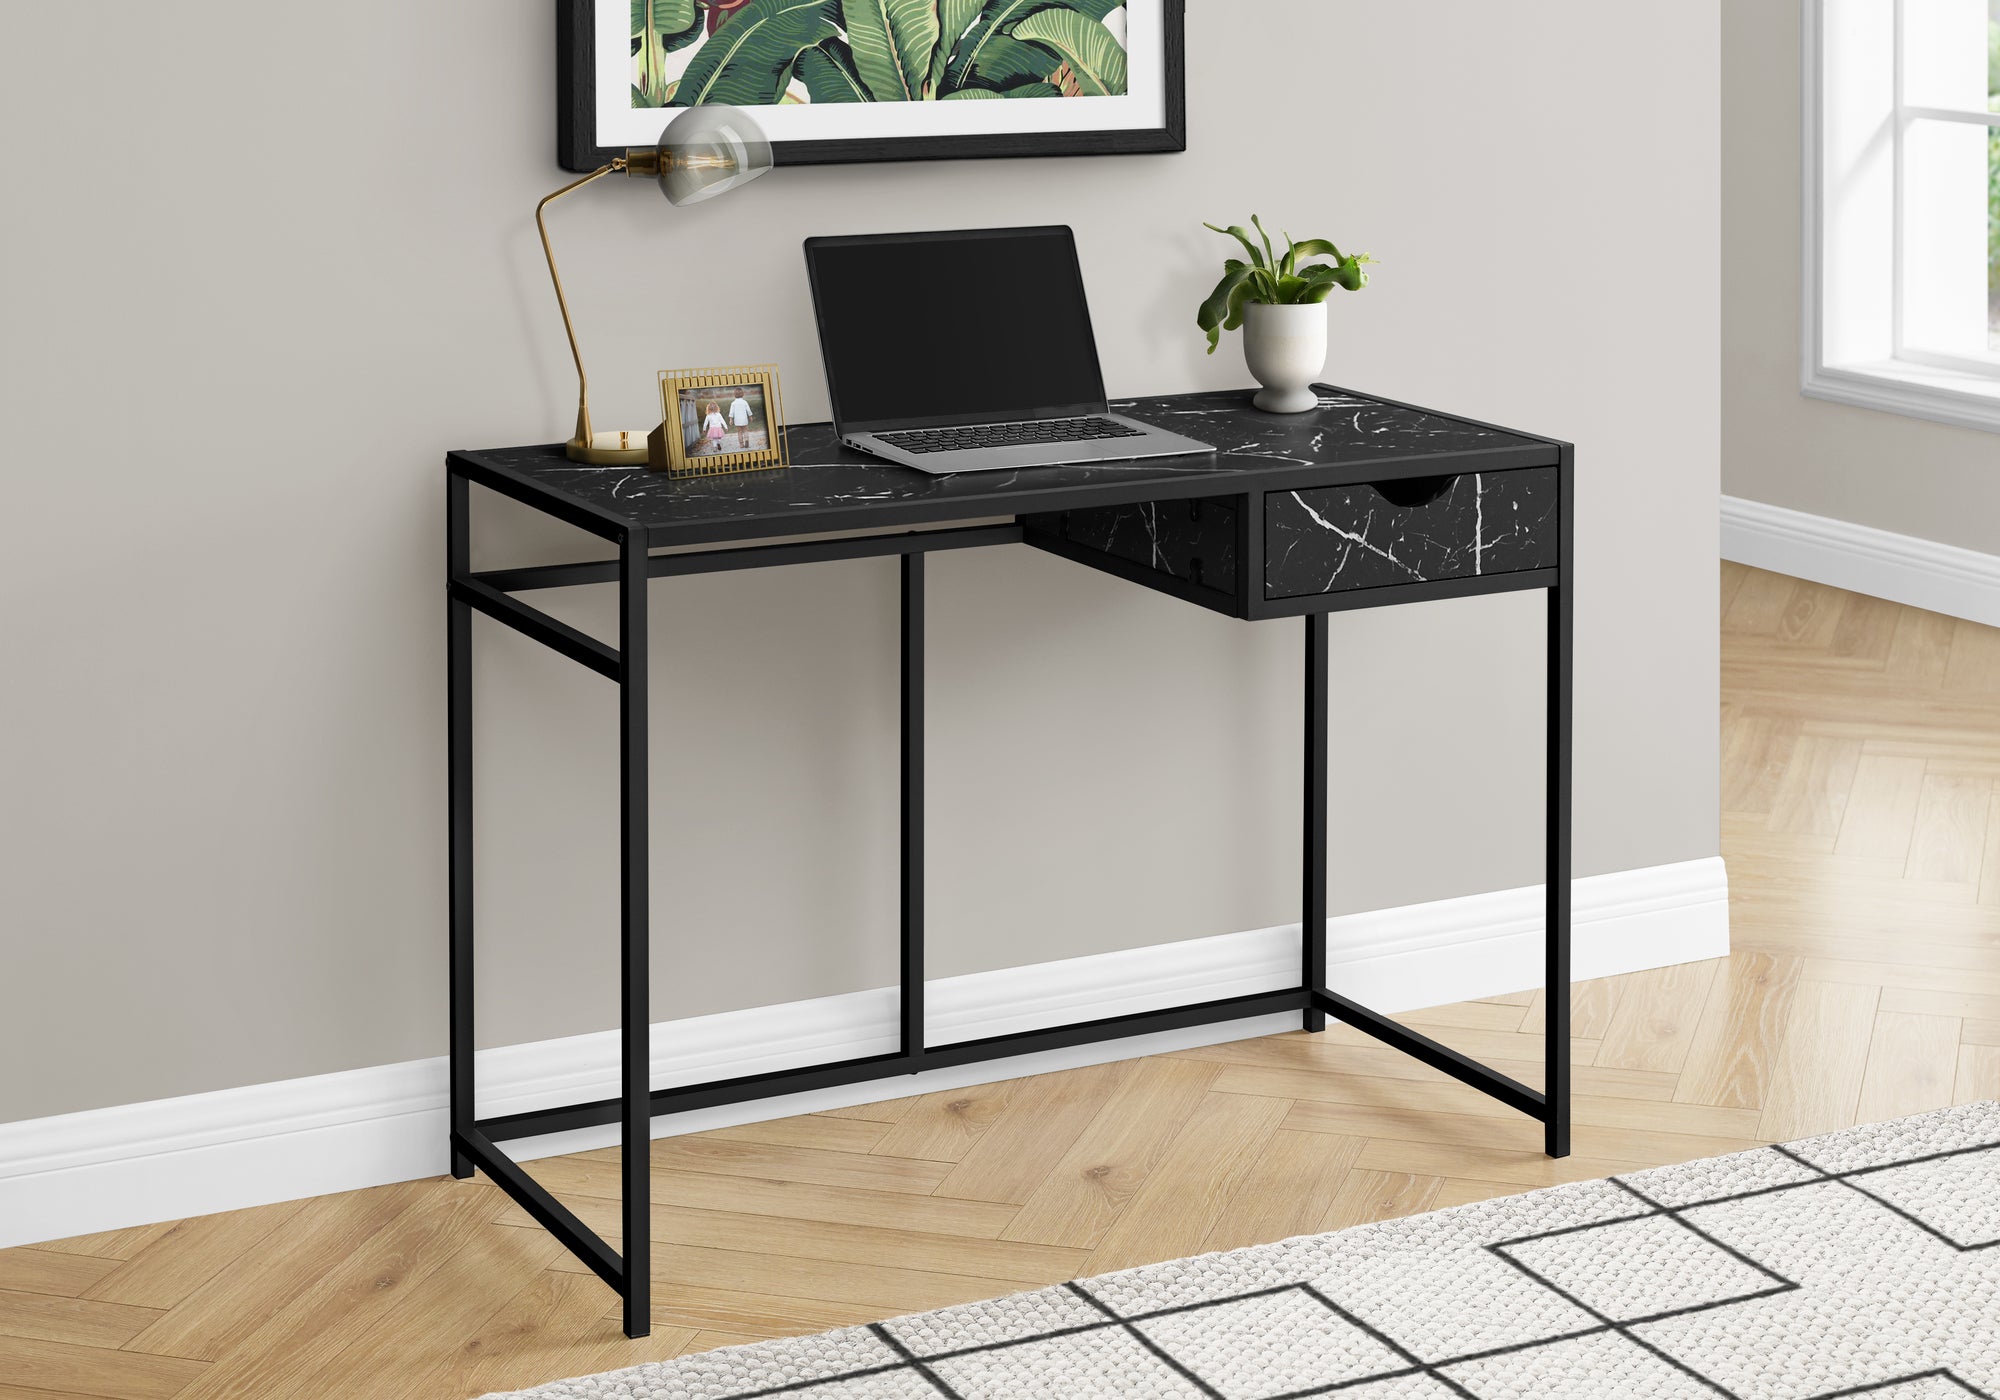 MN-947572    Computer Desk, Home Office, Laptop, Storage Drawers, 42"L, Metal, Laminate, Black Marble-Look, Contemporary, Industrial, Modern